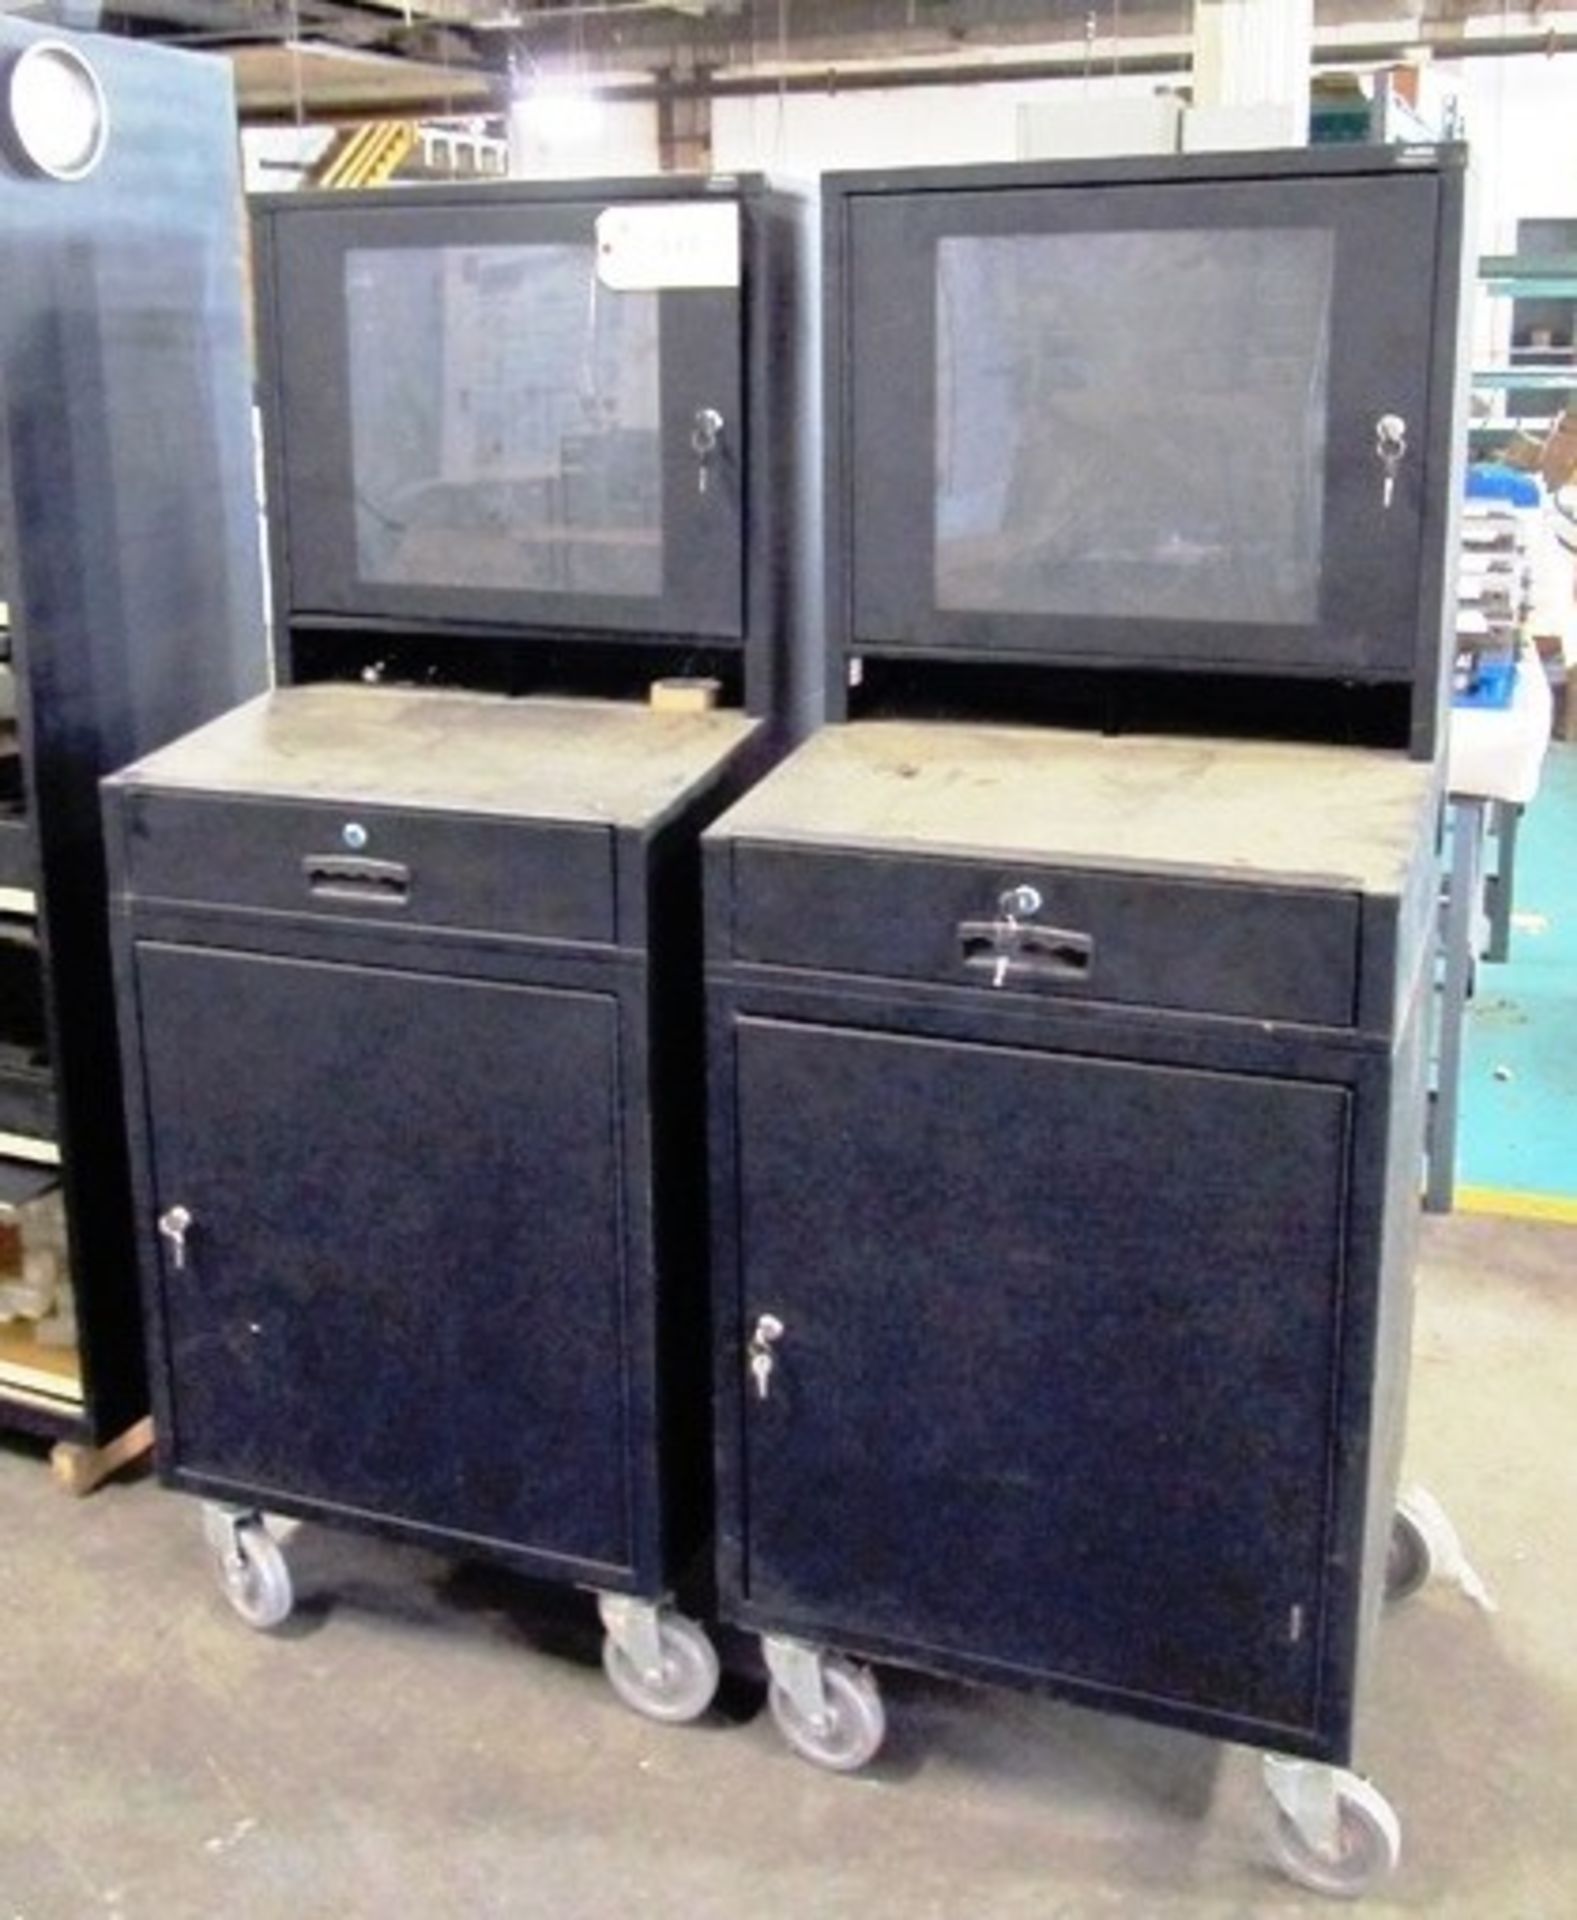 (2) Global Portable Computer Cabinets